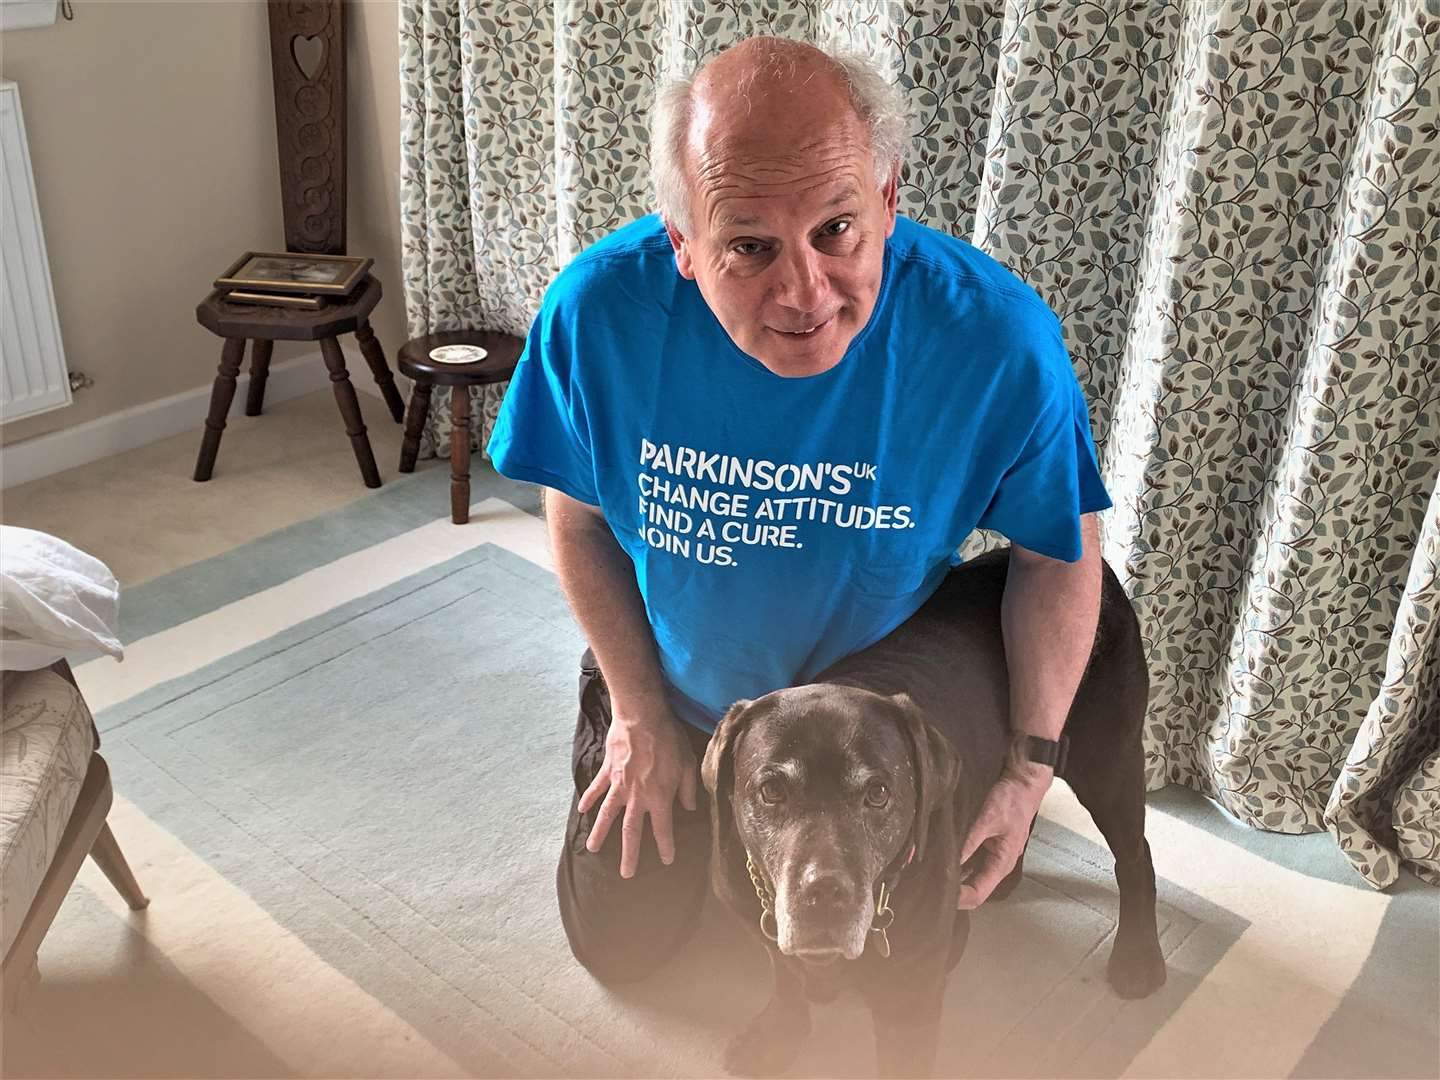 Neil Morrison with his dog Koko is walking the distance of the Inca trail to raise money for Parkinson’s UK.